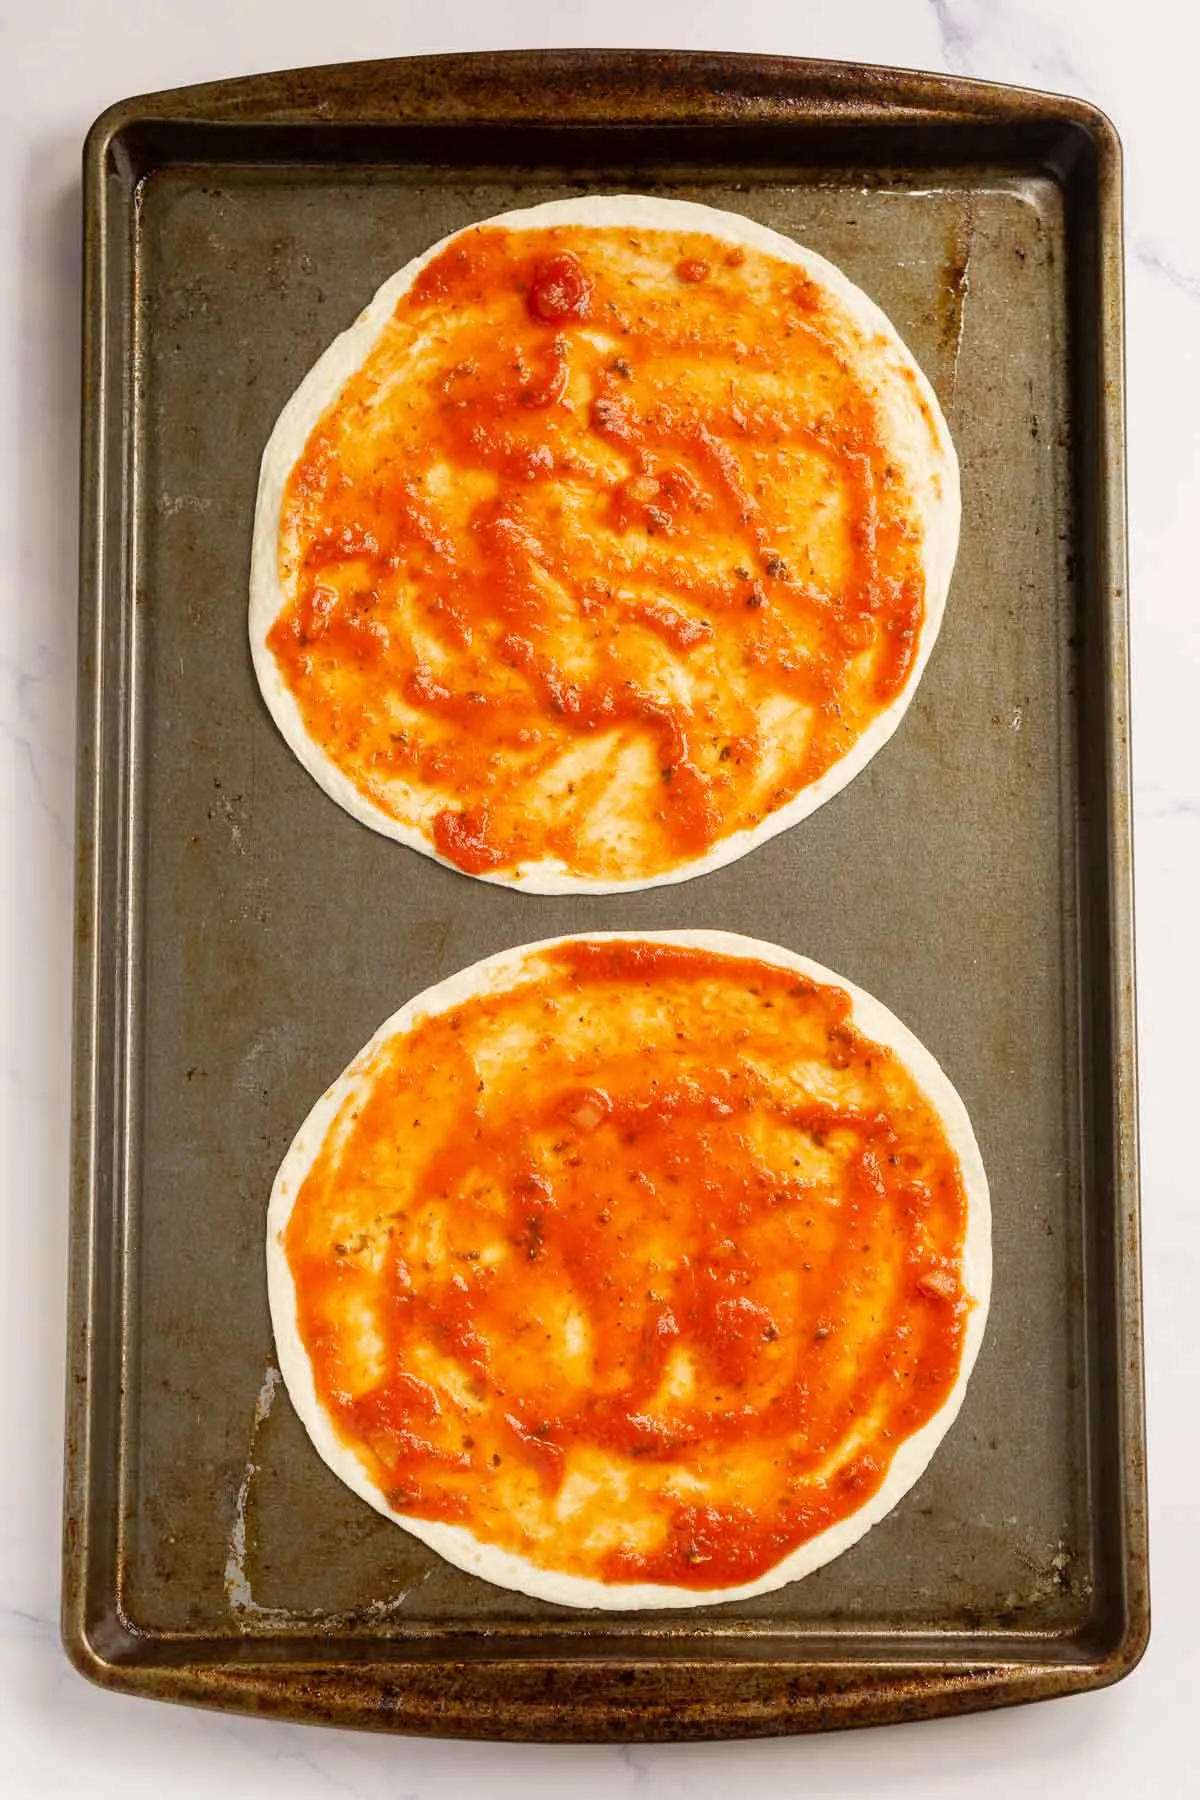 Two tortillas on a baking sheet with pizza sauce spread on them.